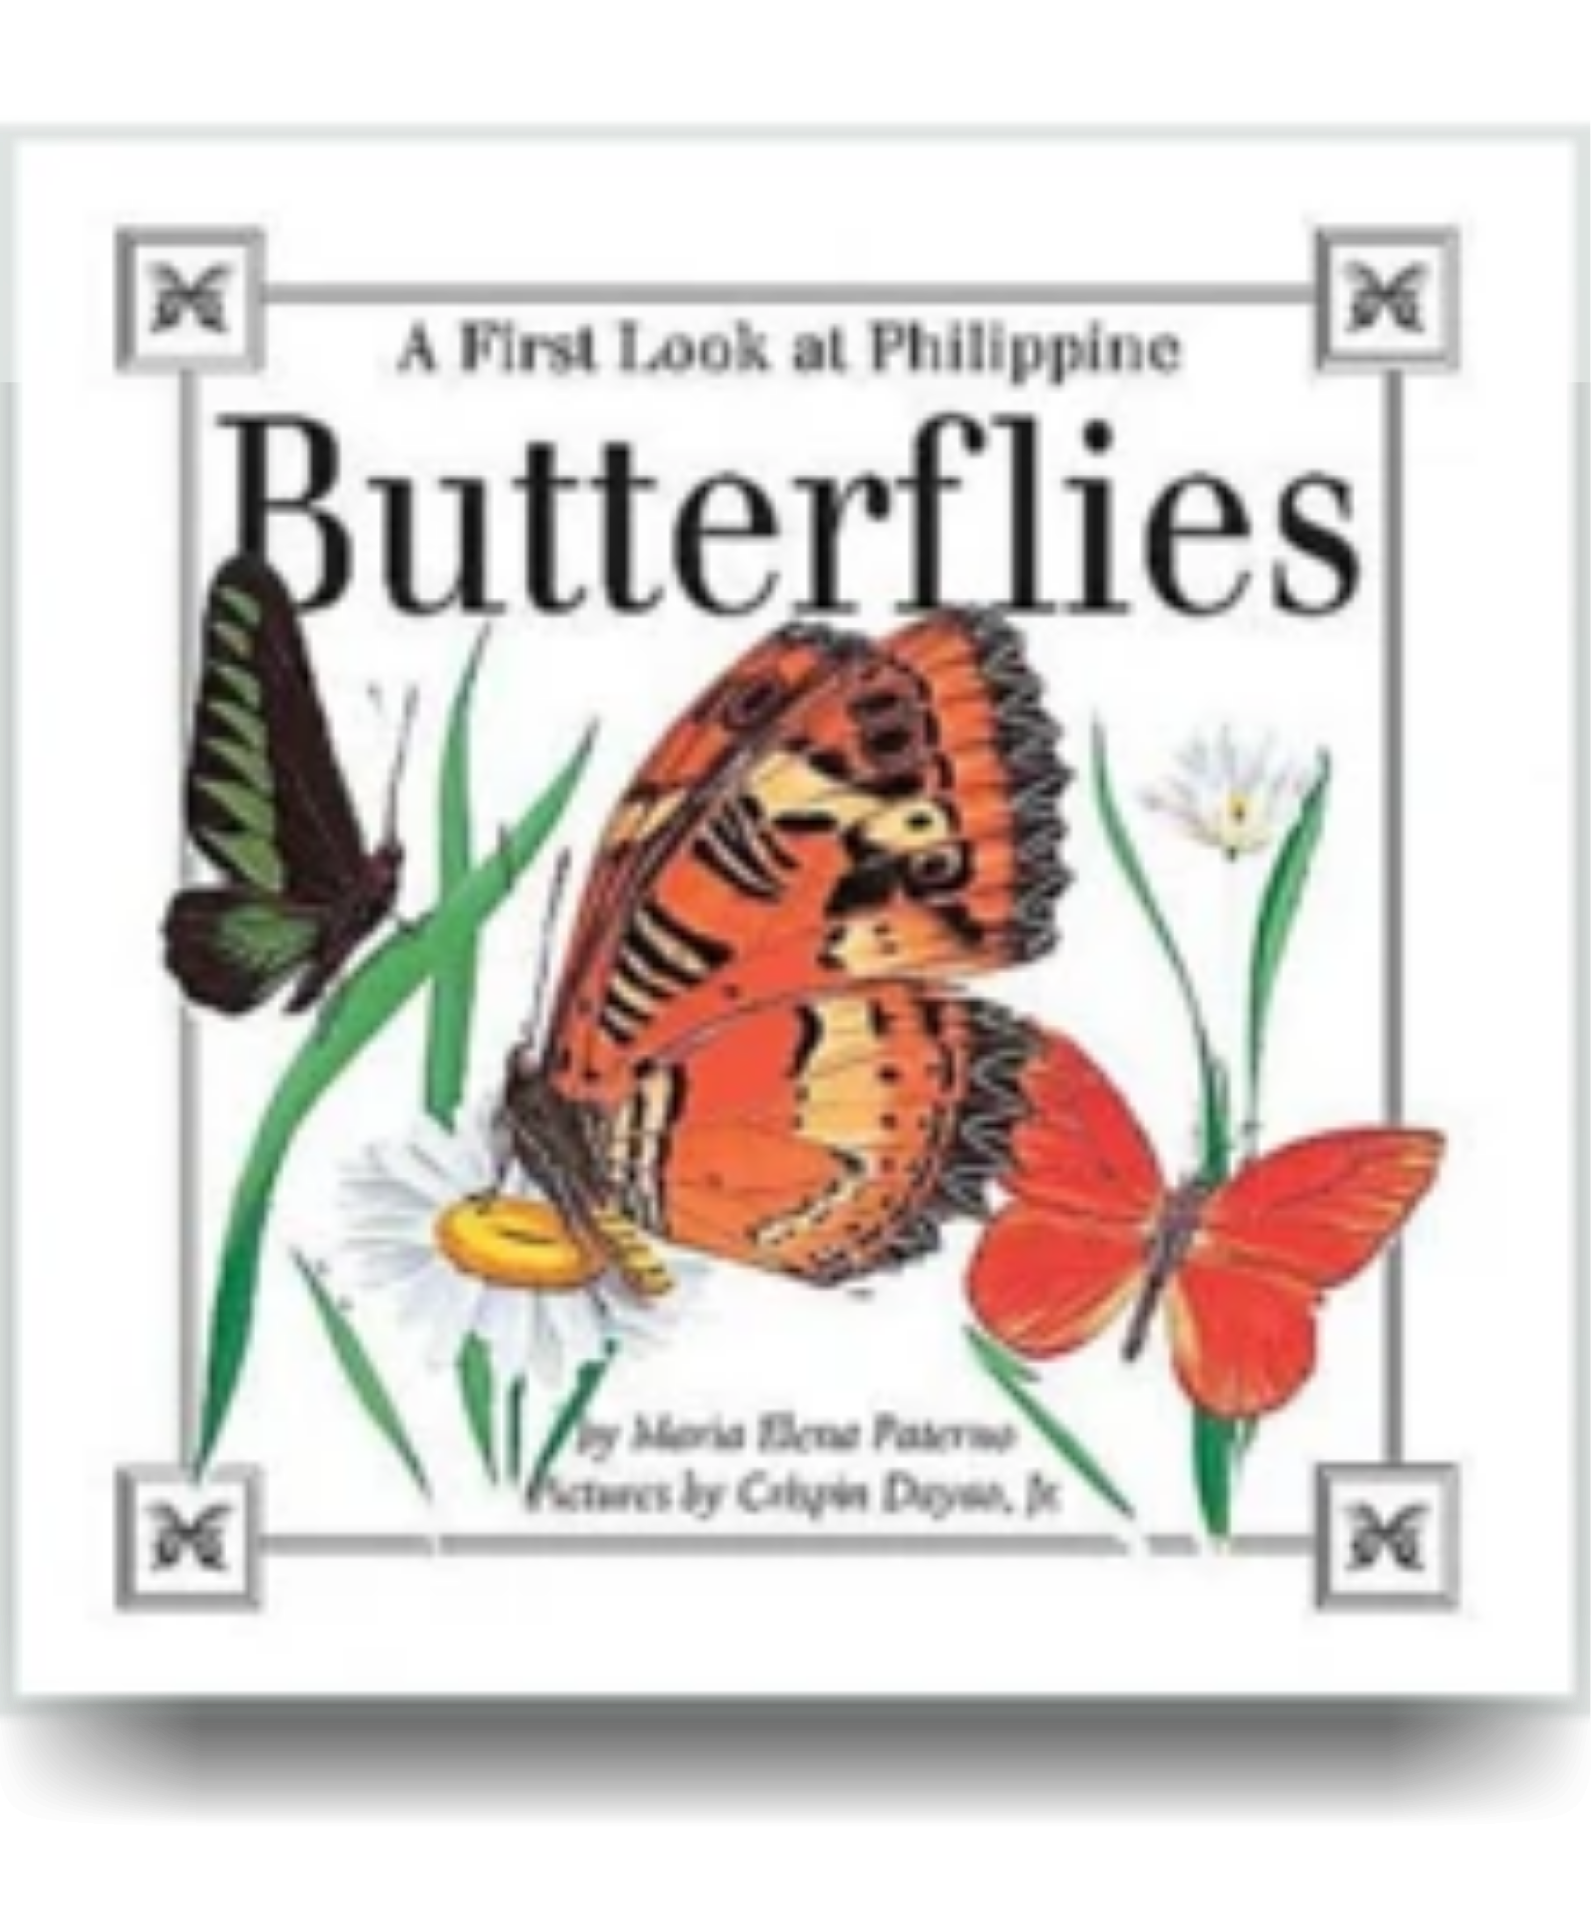 A First Look at Philippine BUTTERFLIES - Philippine Expressions Bookshop